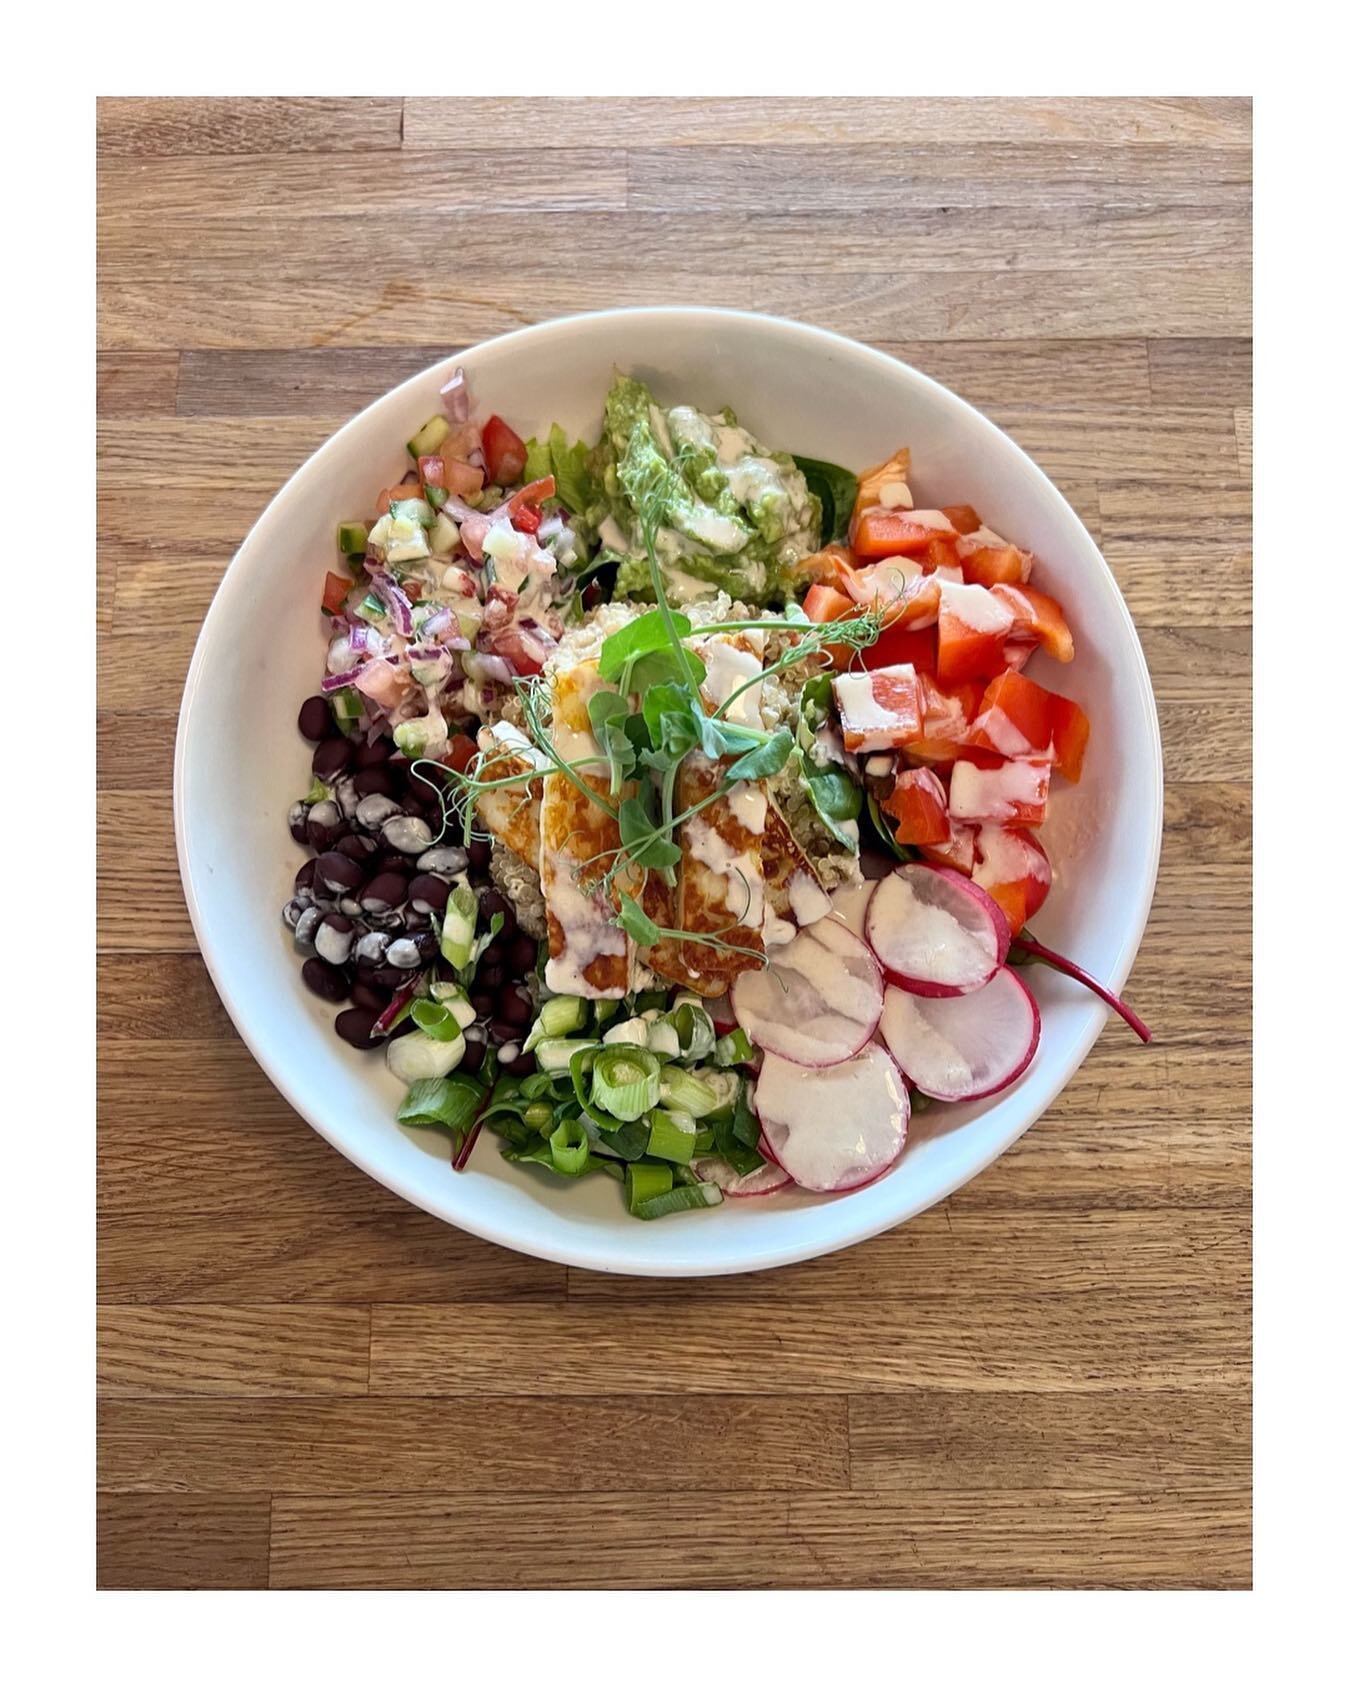 The response to our new menu has been incredible! The Buddha Bowl is definitely in the running for most popular dish! 

#brightonfoodie #brightonfood #brighton #brightonandhove #foodie #hove #brightonlife #food #brightonfoodscene #foodporn #brightonb